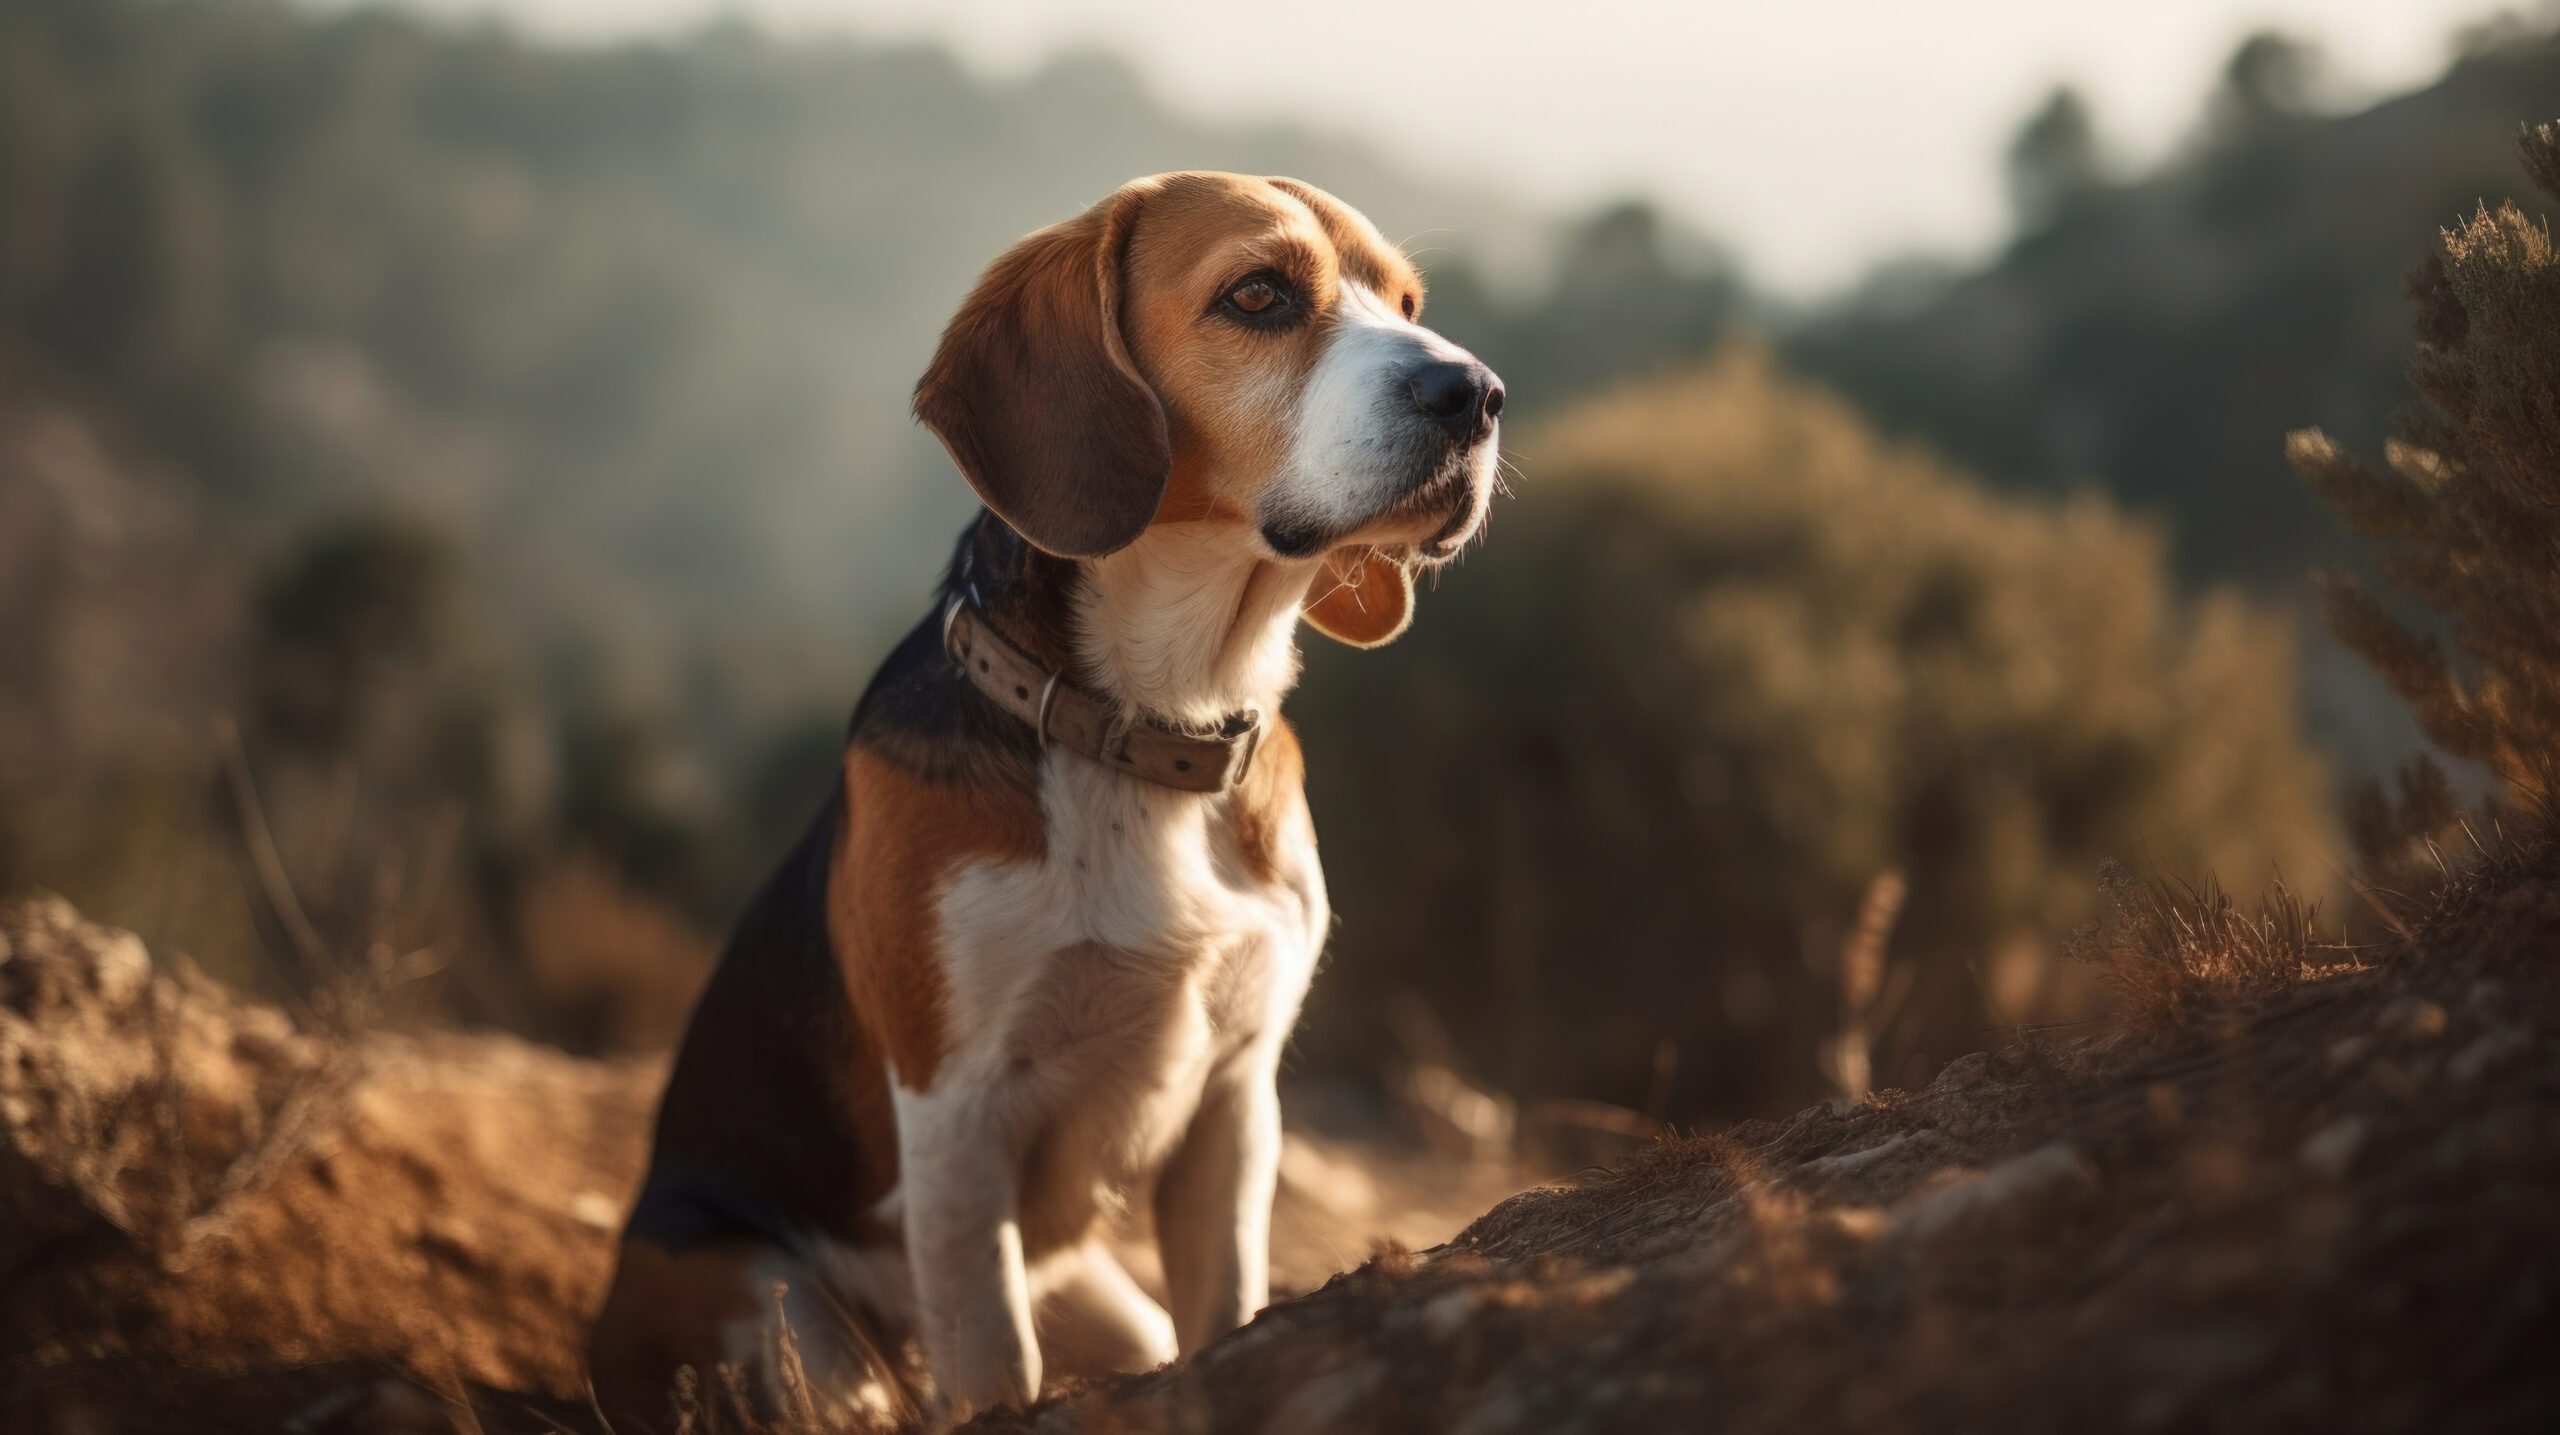 stunning hd wallpaper image of a beagle up on a mountain with a scenic background and sun shining